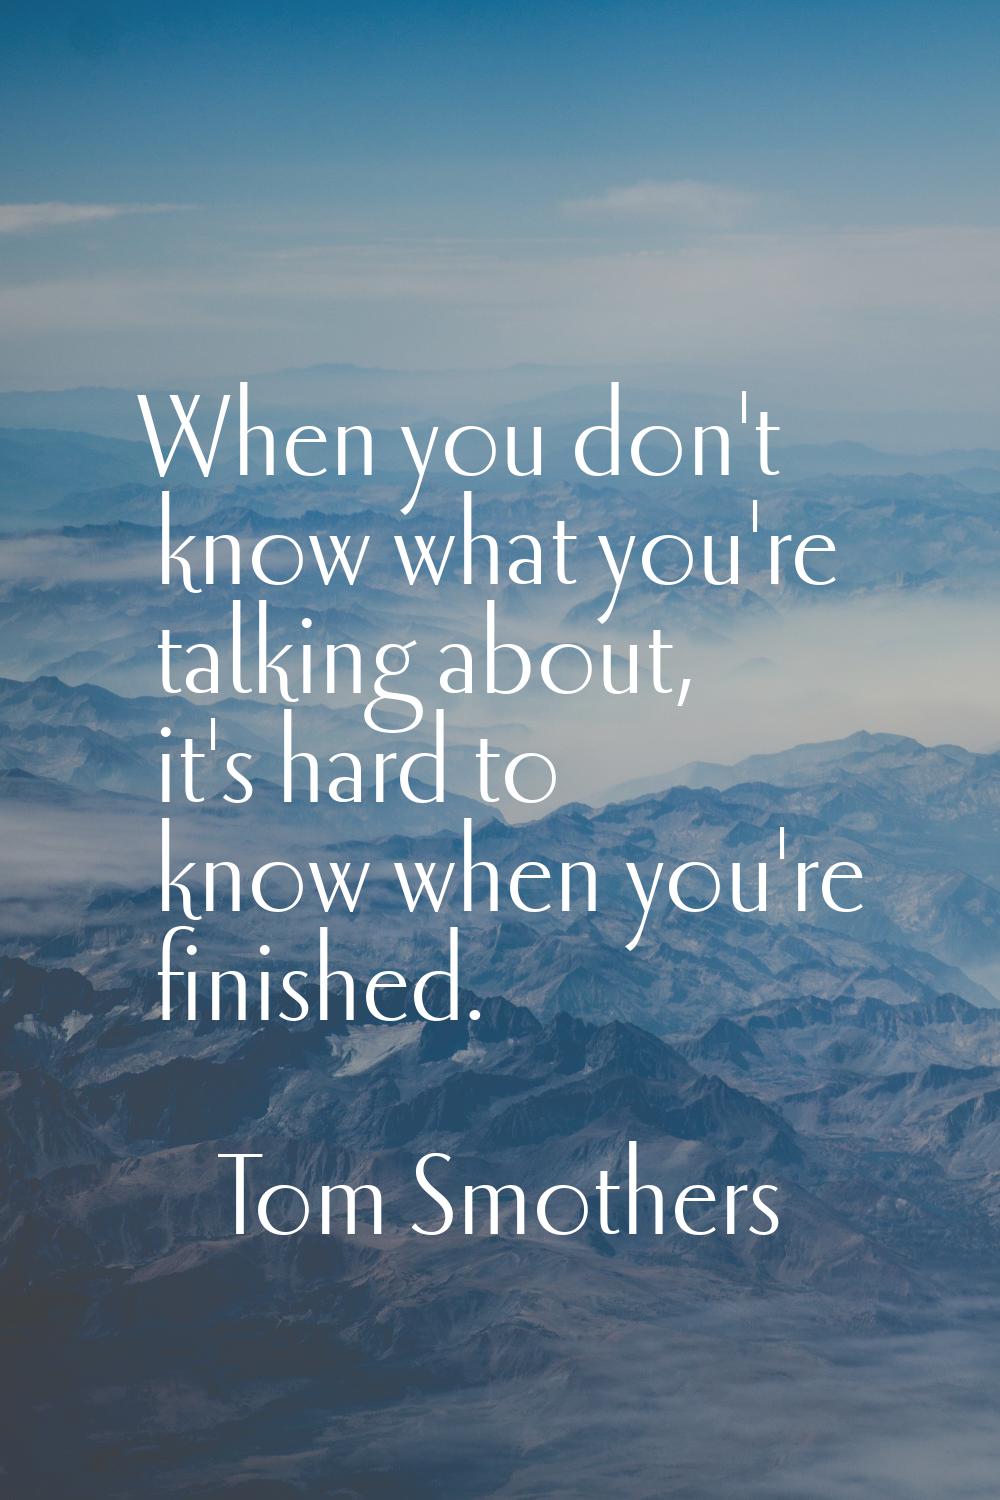 When you don't know what you're talking about, it's hard to know when you're finished.